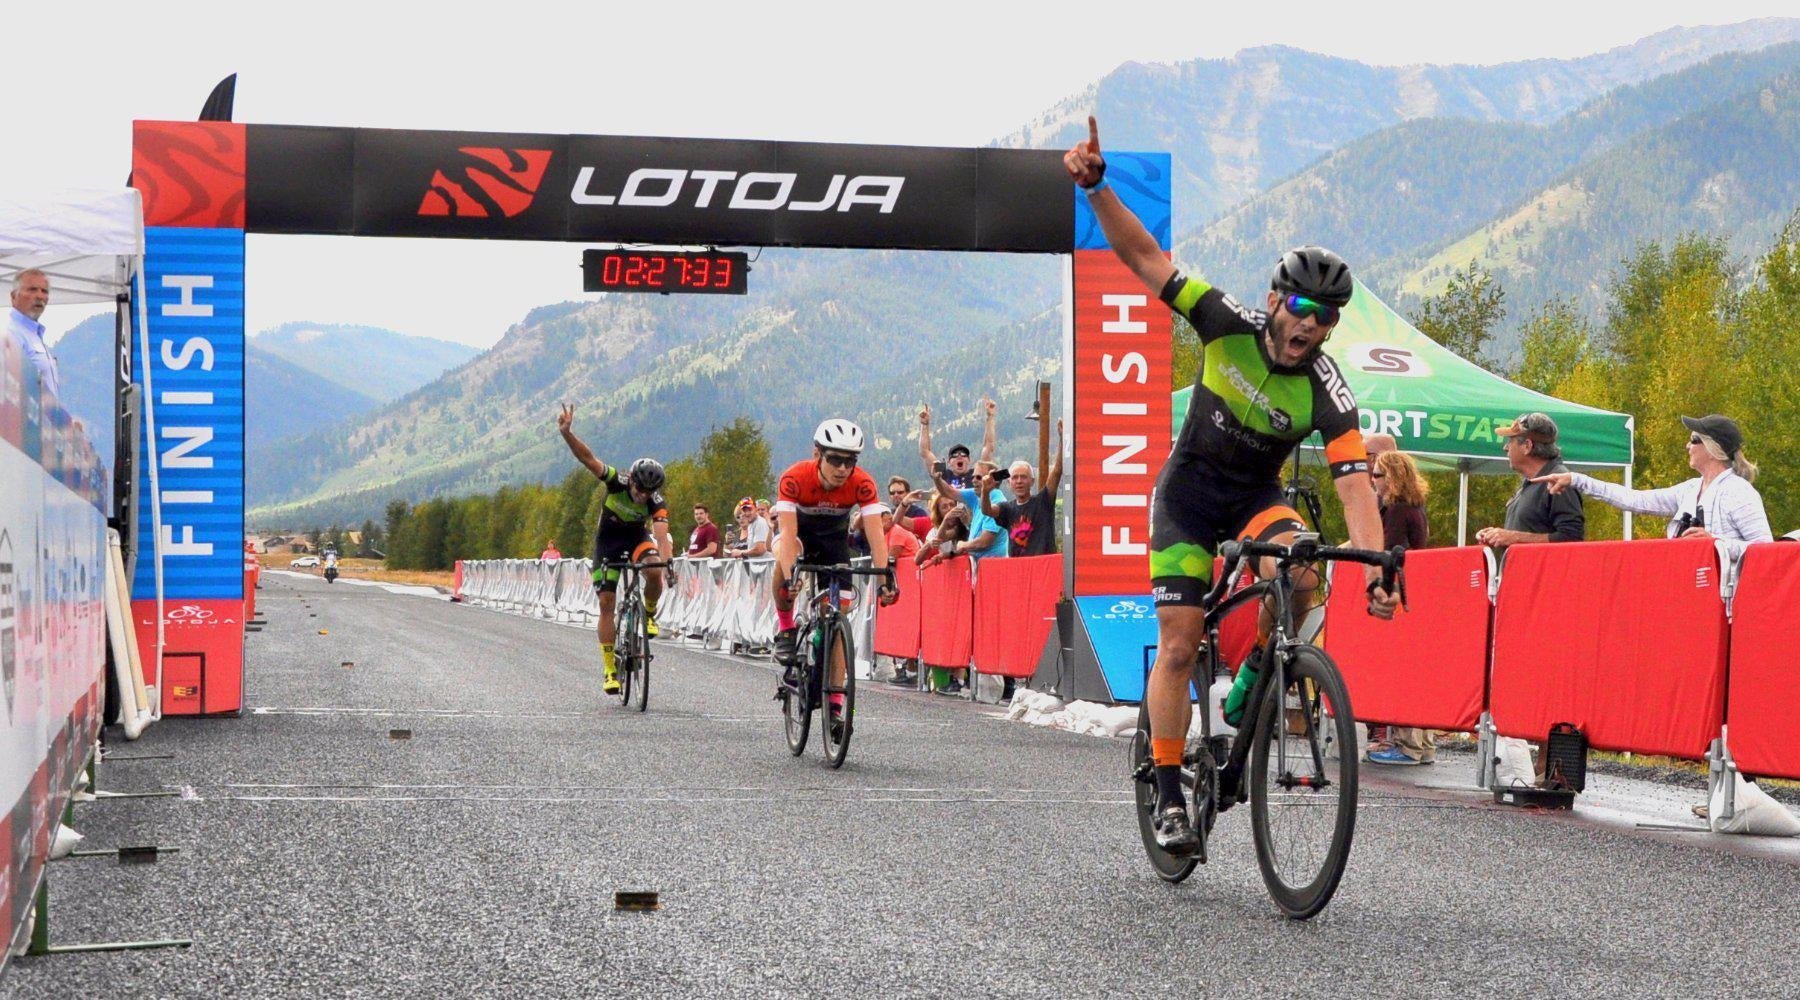 Team Endurance360® Rider Wins LOTOJA, Proves He's Racing Clean - Beetroot Pro® & Endurance360® Official Store